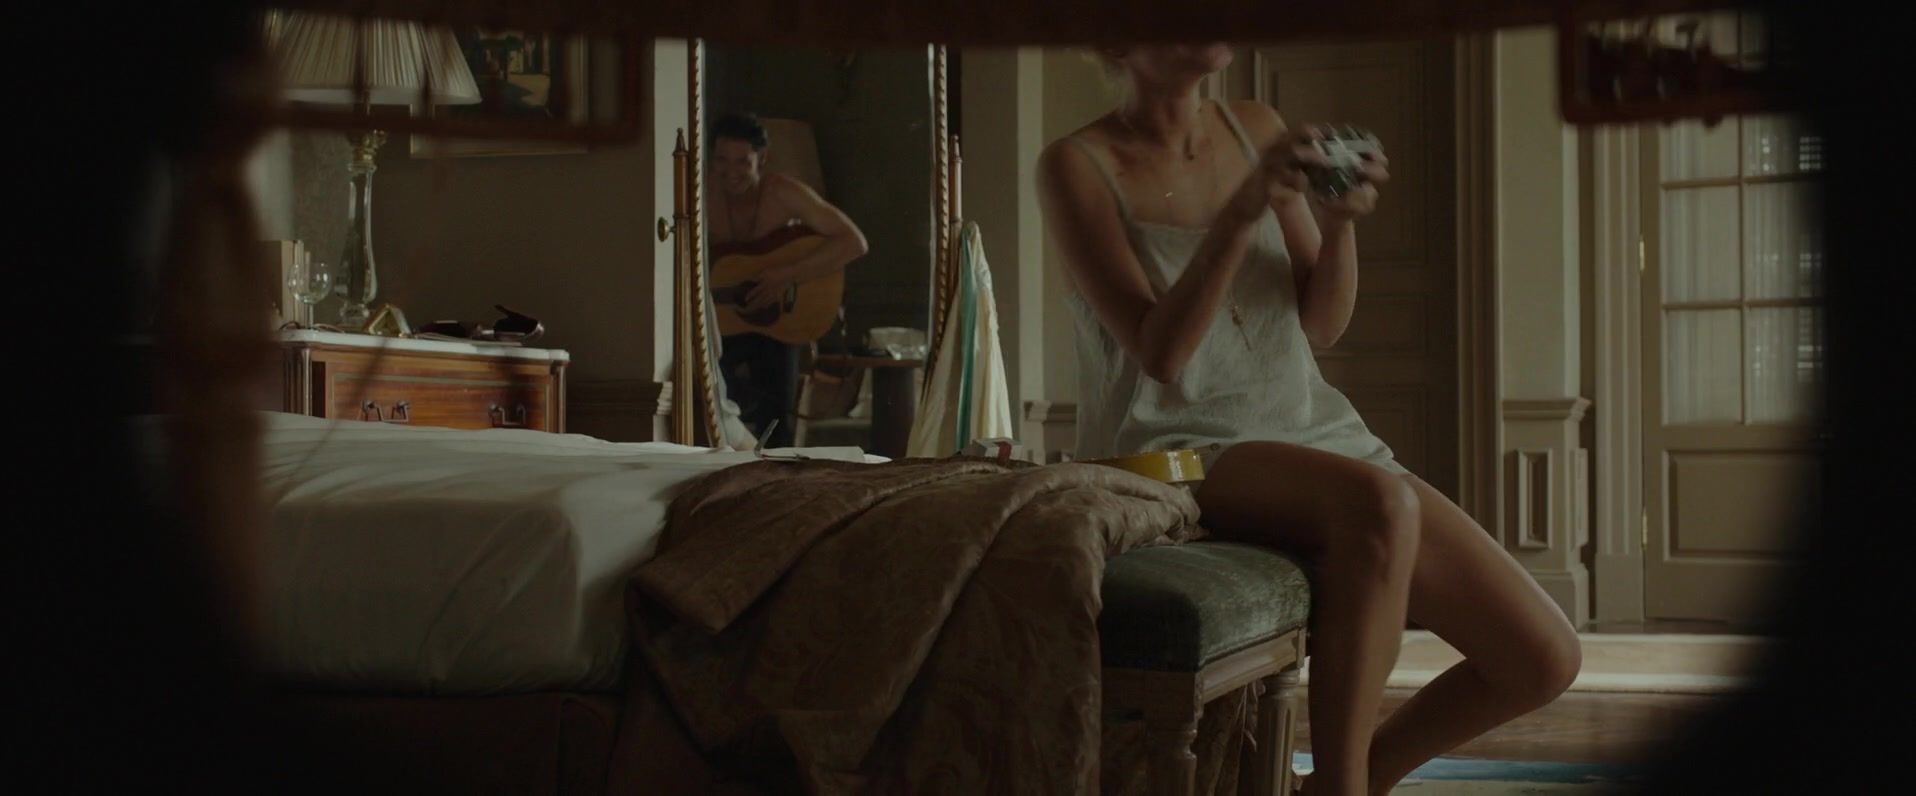 Tattoos Melanie Laurent - By The Sea (2015) Rimming - 2